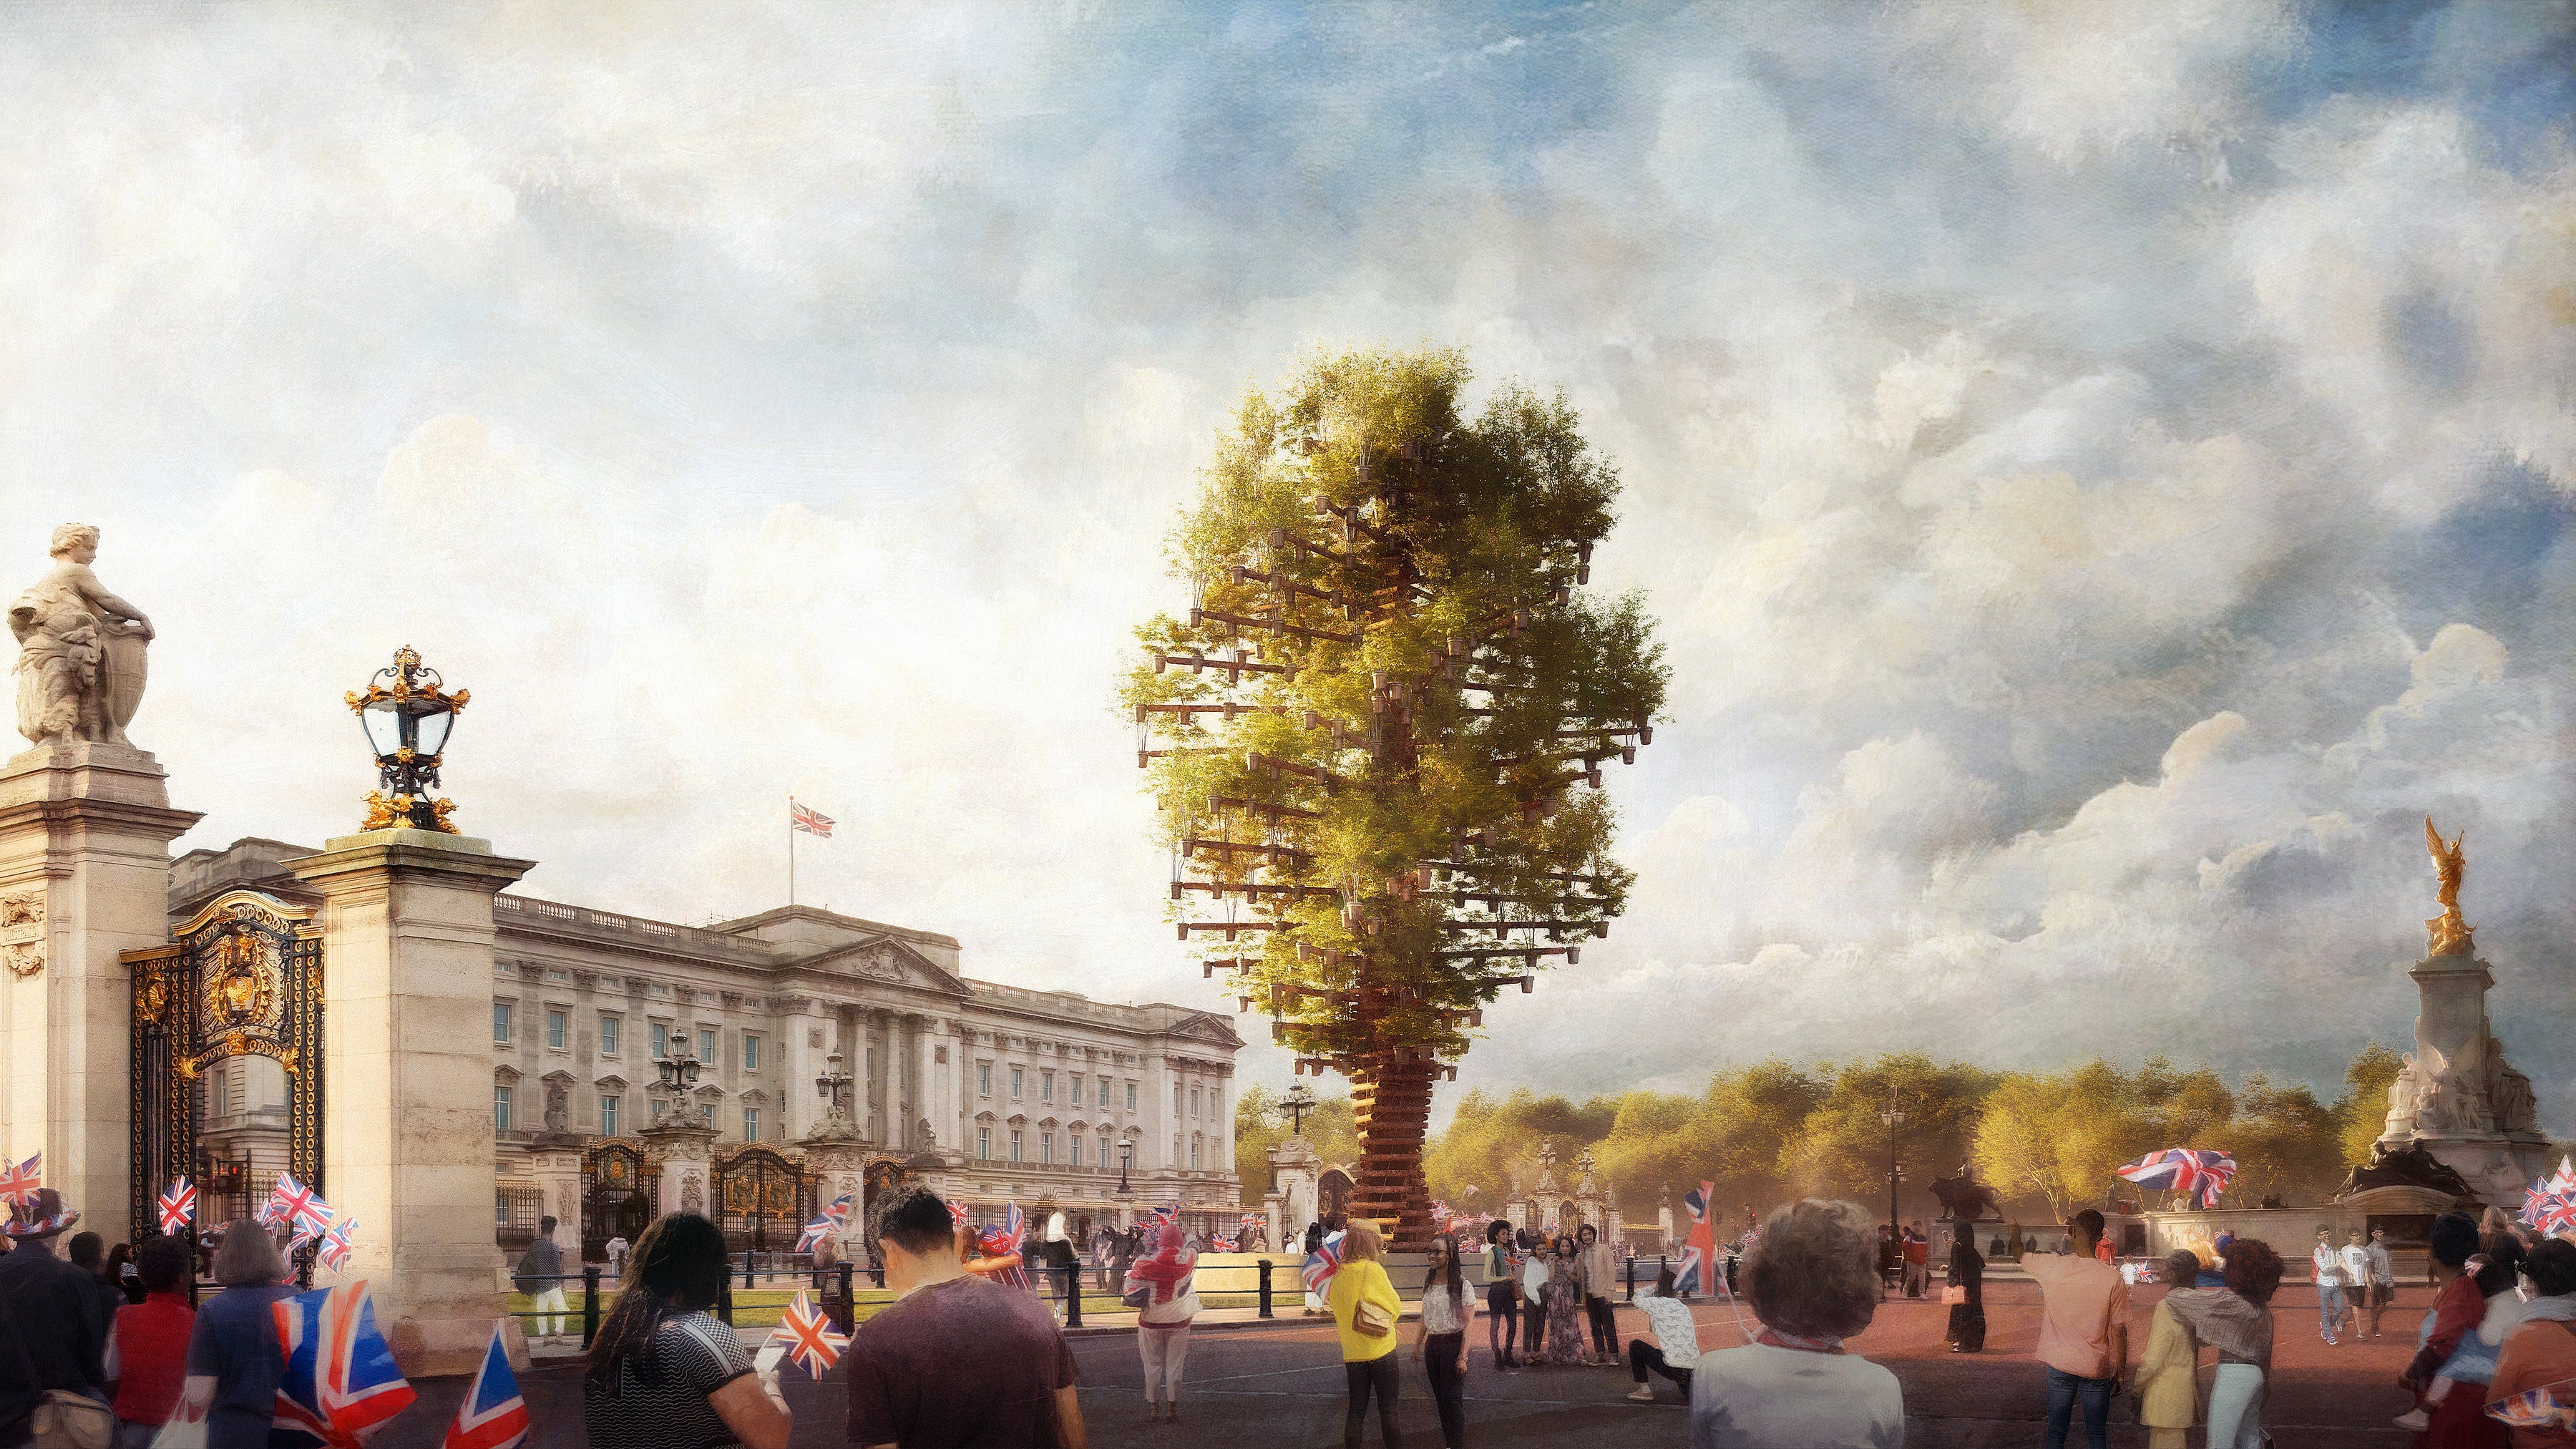 Artist’s impression of a living sculpture featuring 350 British native trees to be erected outside Buckingham Palace for the Queen’s Jubilee (Heatherwick Studio for TheQueen’s Green Canopy/PA)